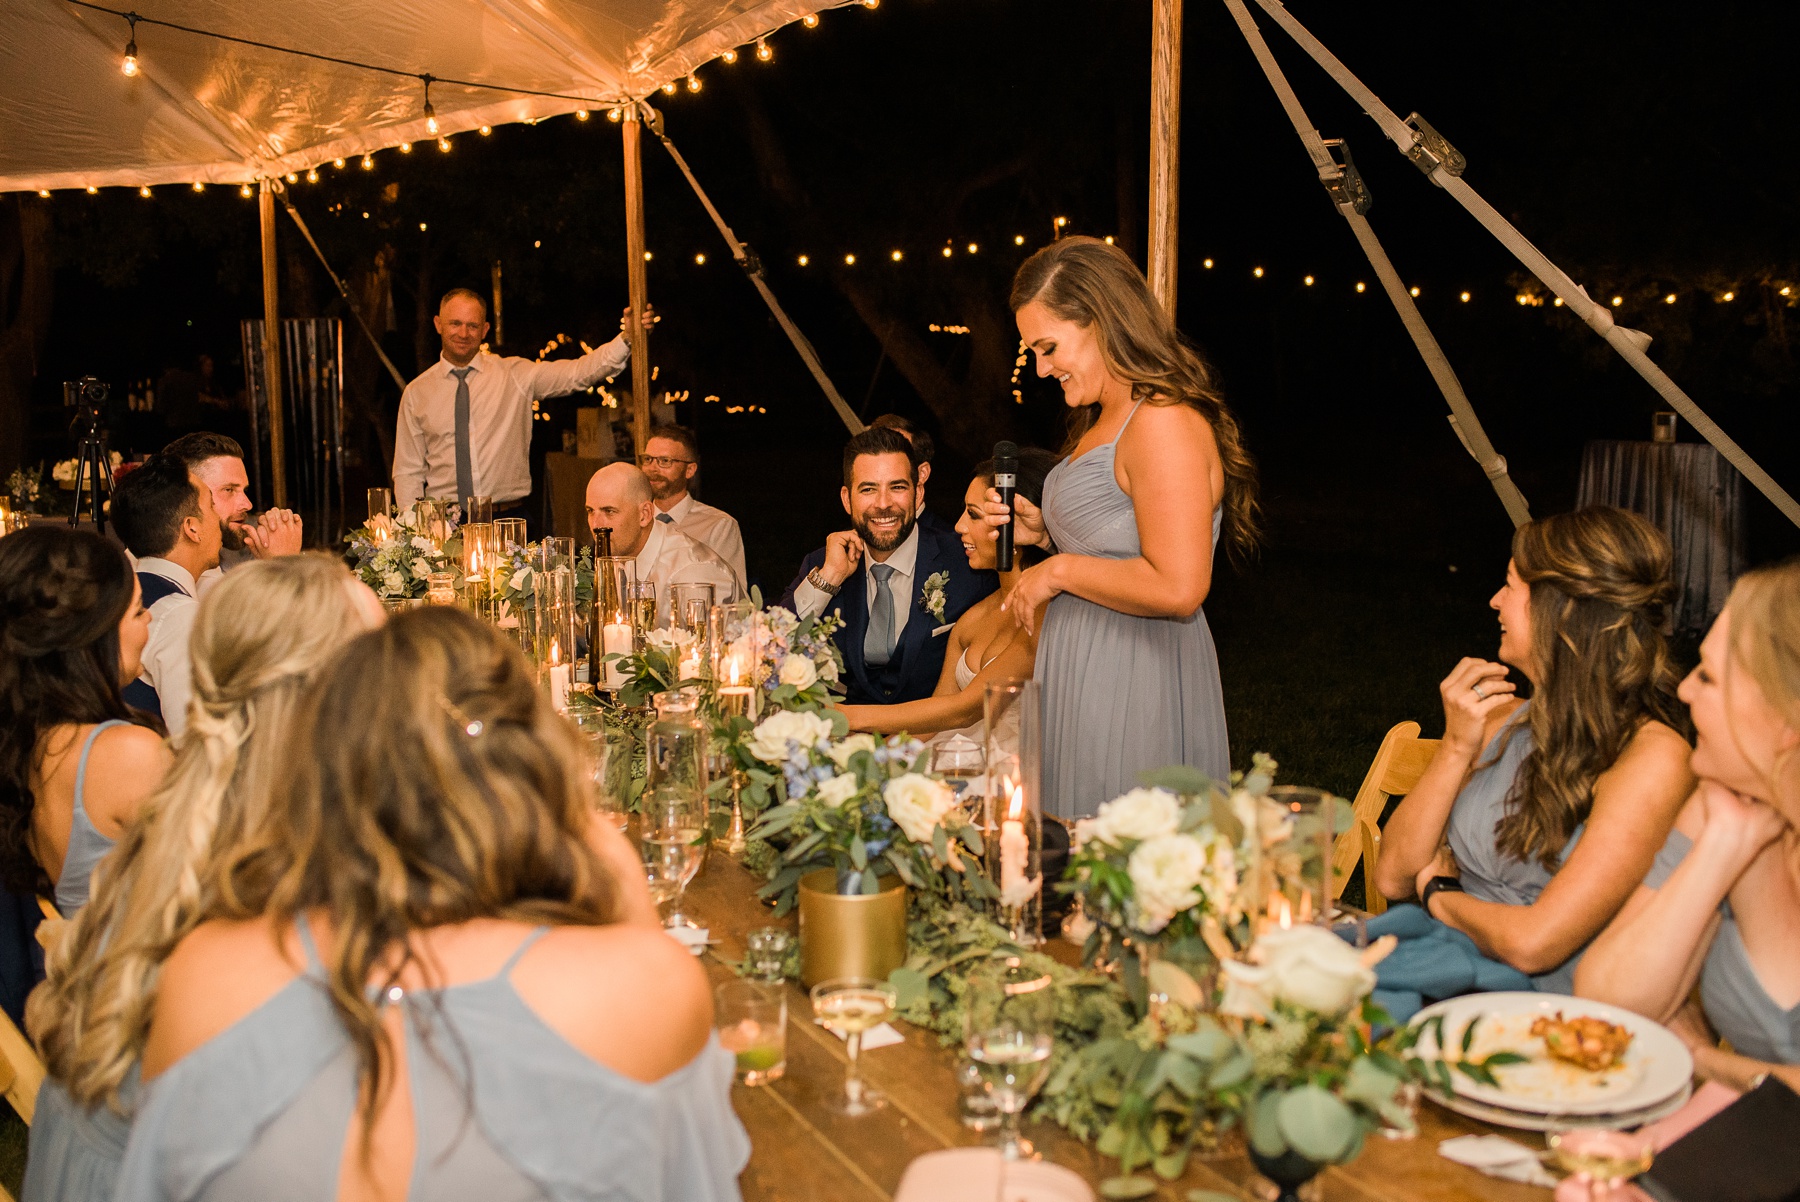 Wedding Toasts During Tented Reception